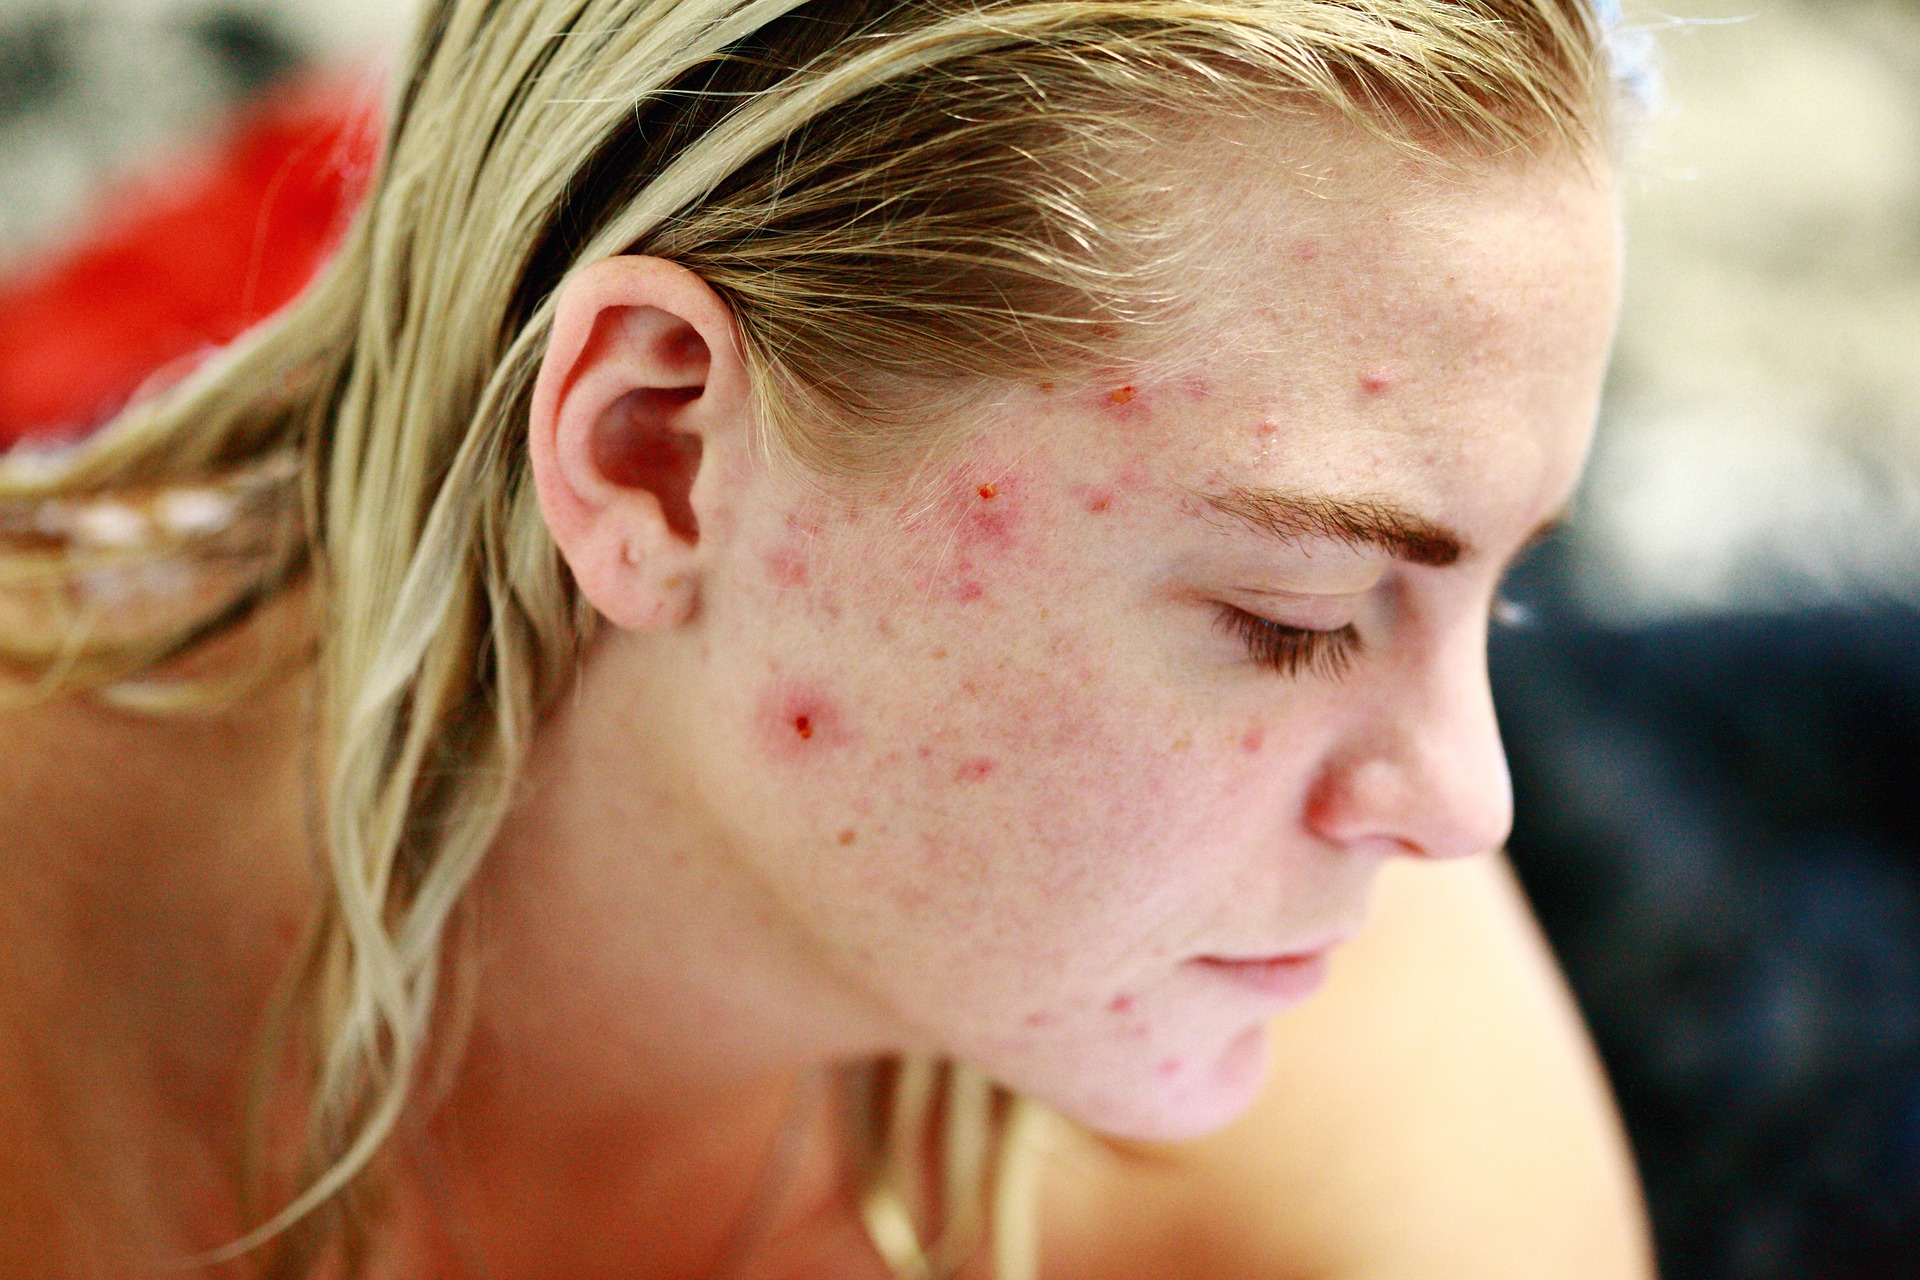 20 Best Natural Remedies for Acne